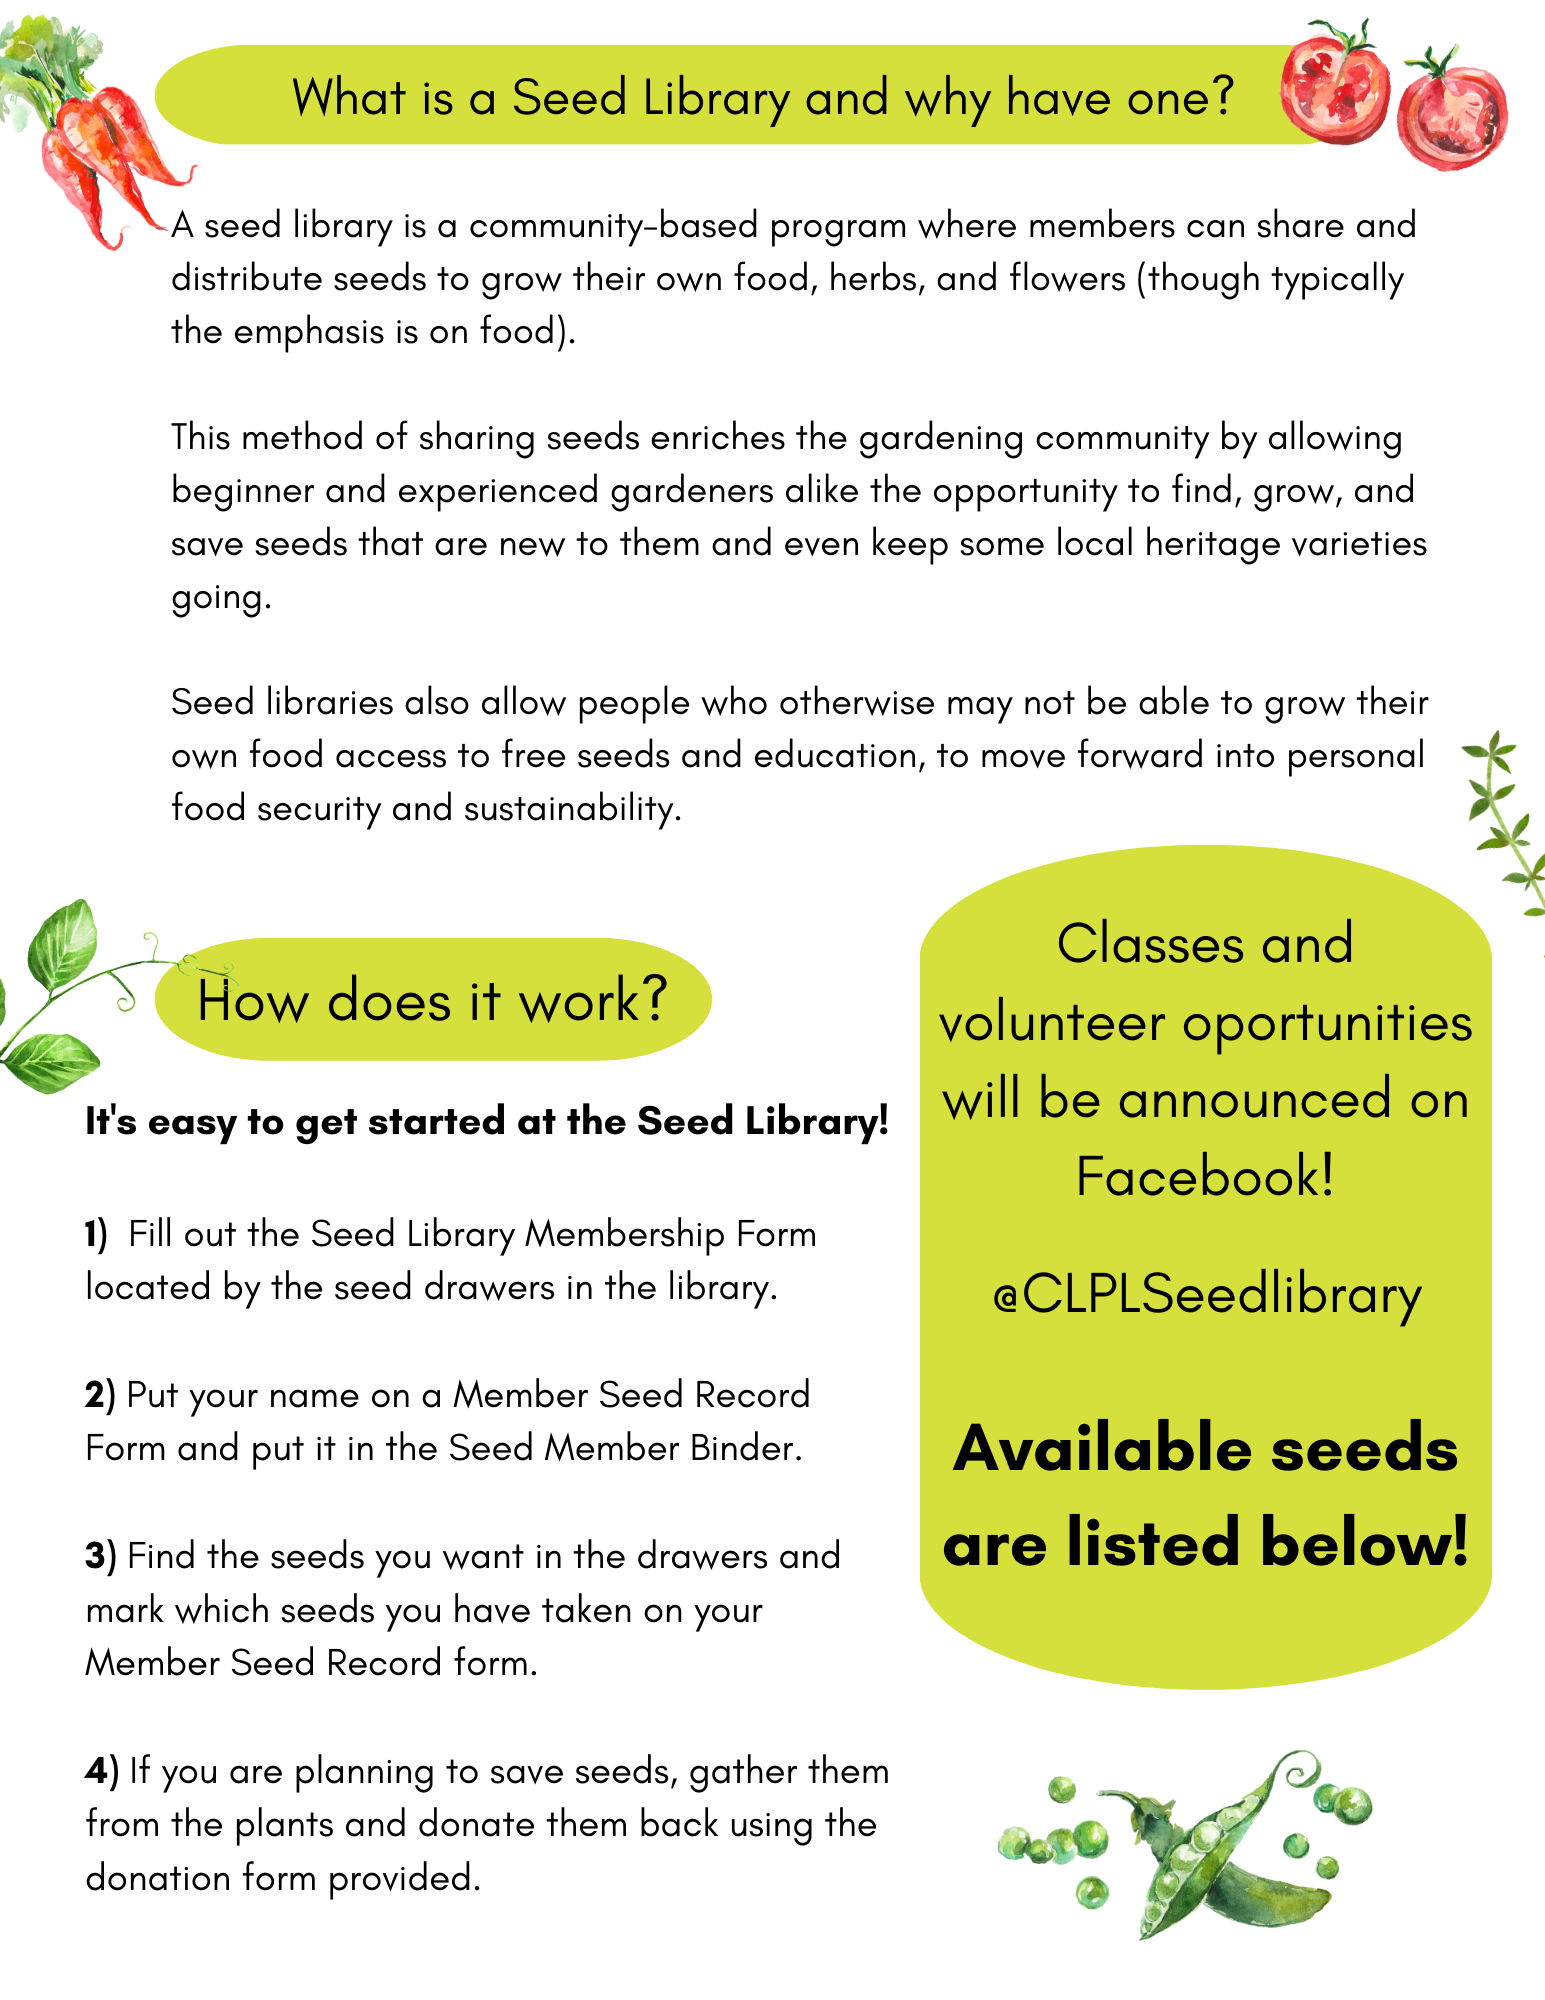 Seed Library information, what is a seed library and how to use it. Information on classes and volunteer opportunities will be posted on FB.